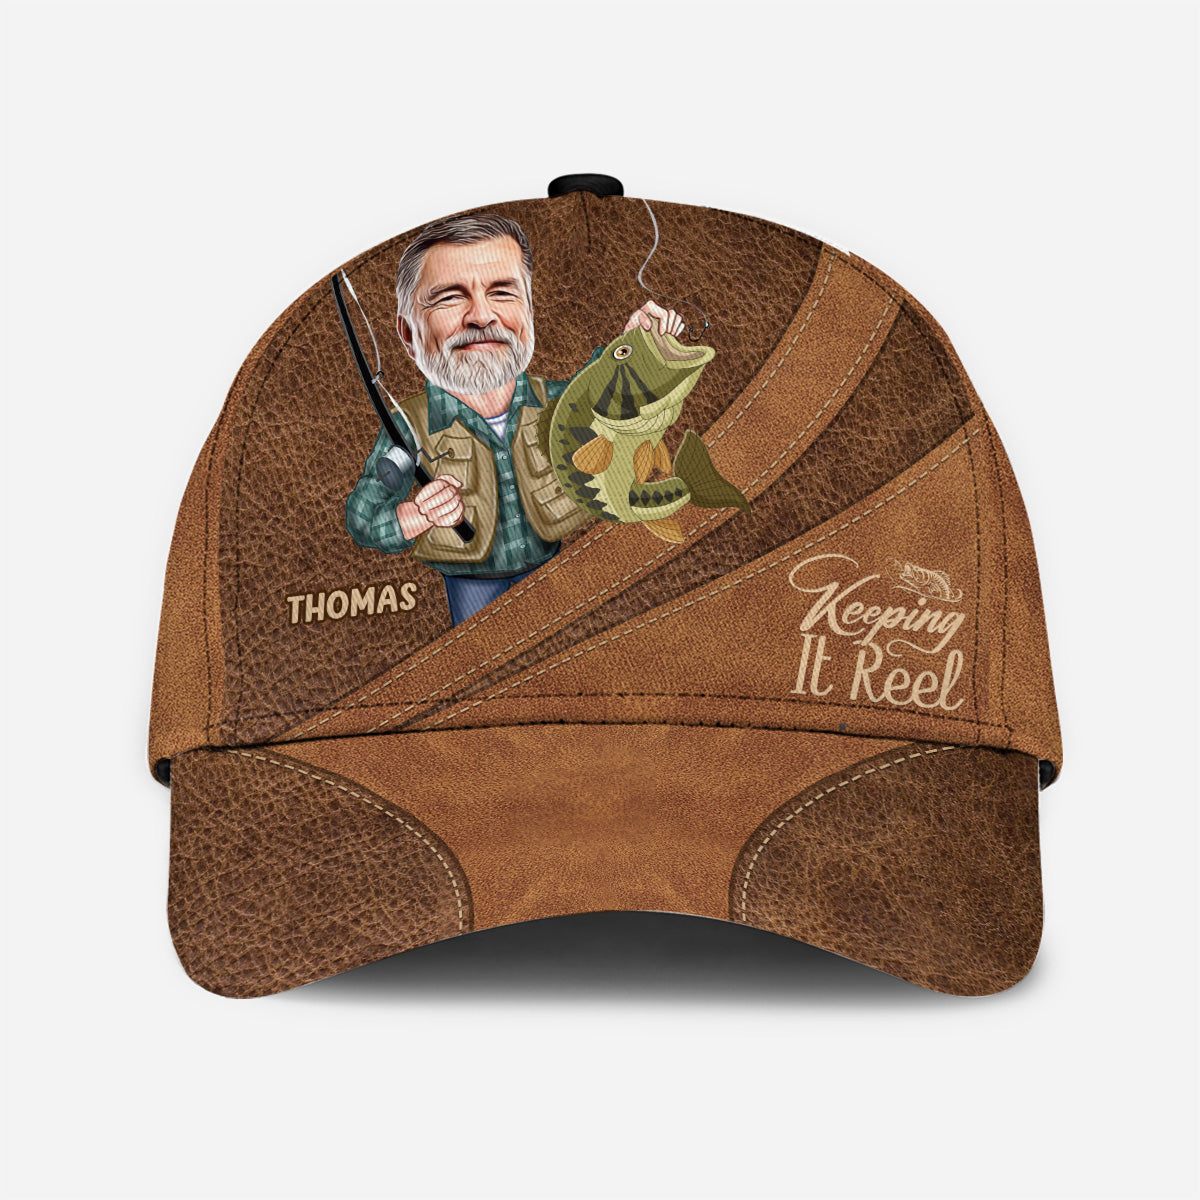 Photo Inserted Funny Fishing Keeping It Reel - Personalized Fishing Classic Cap